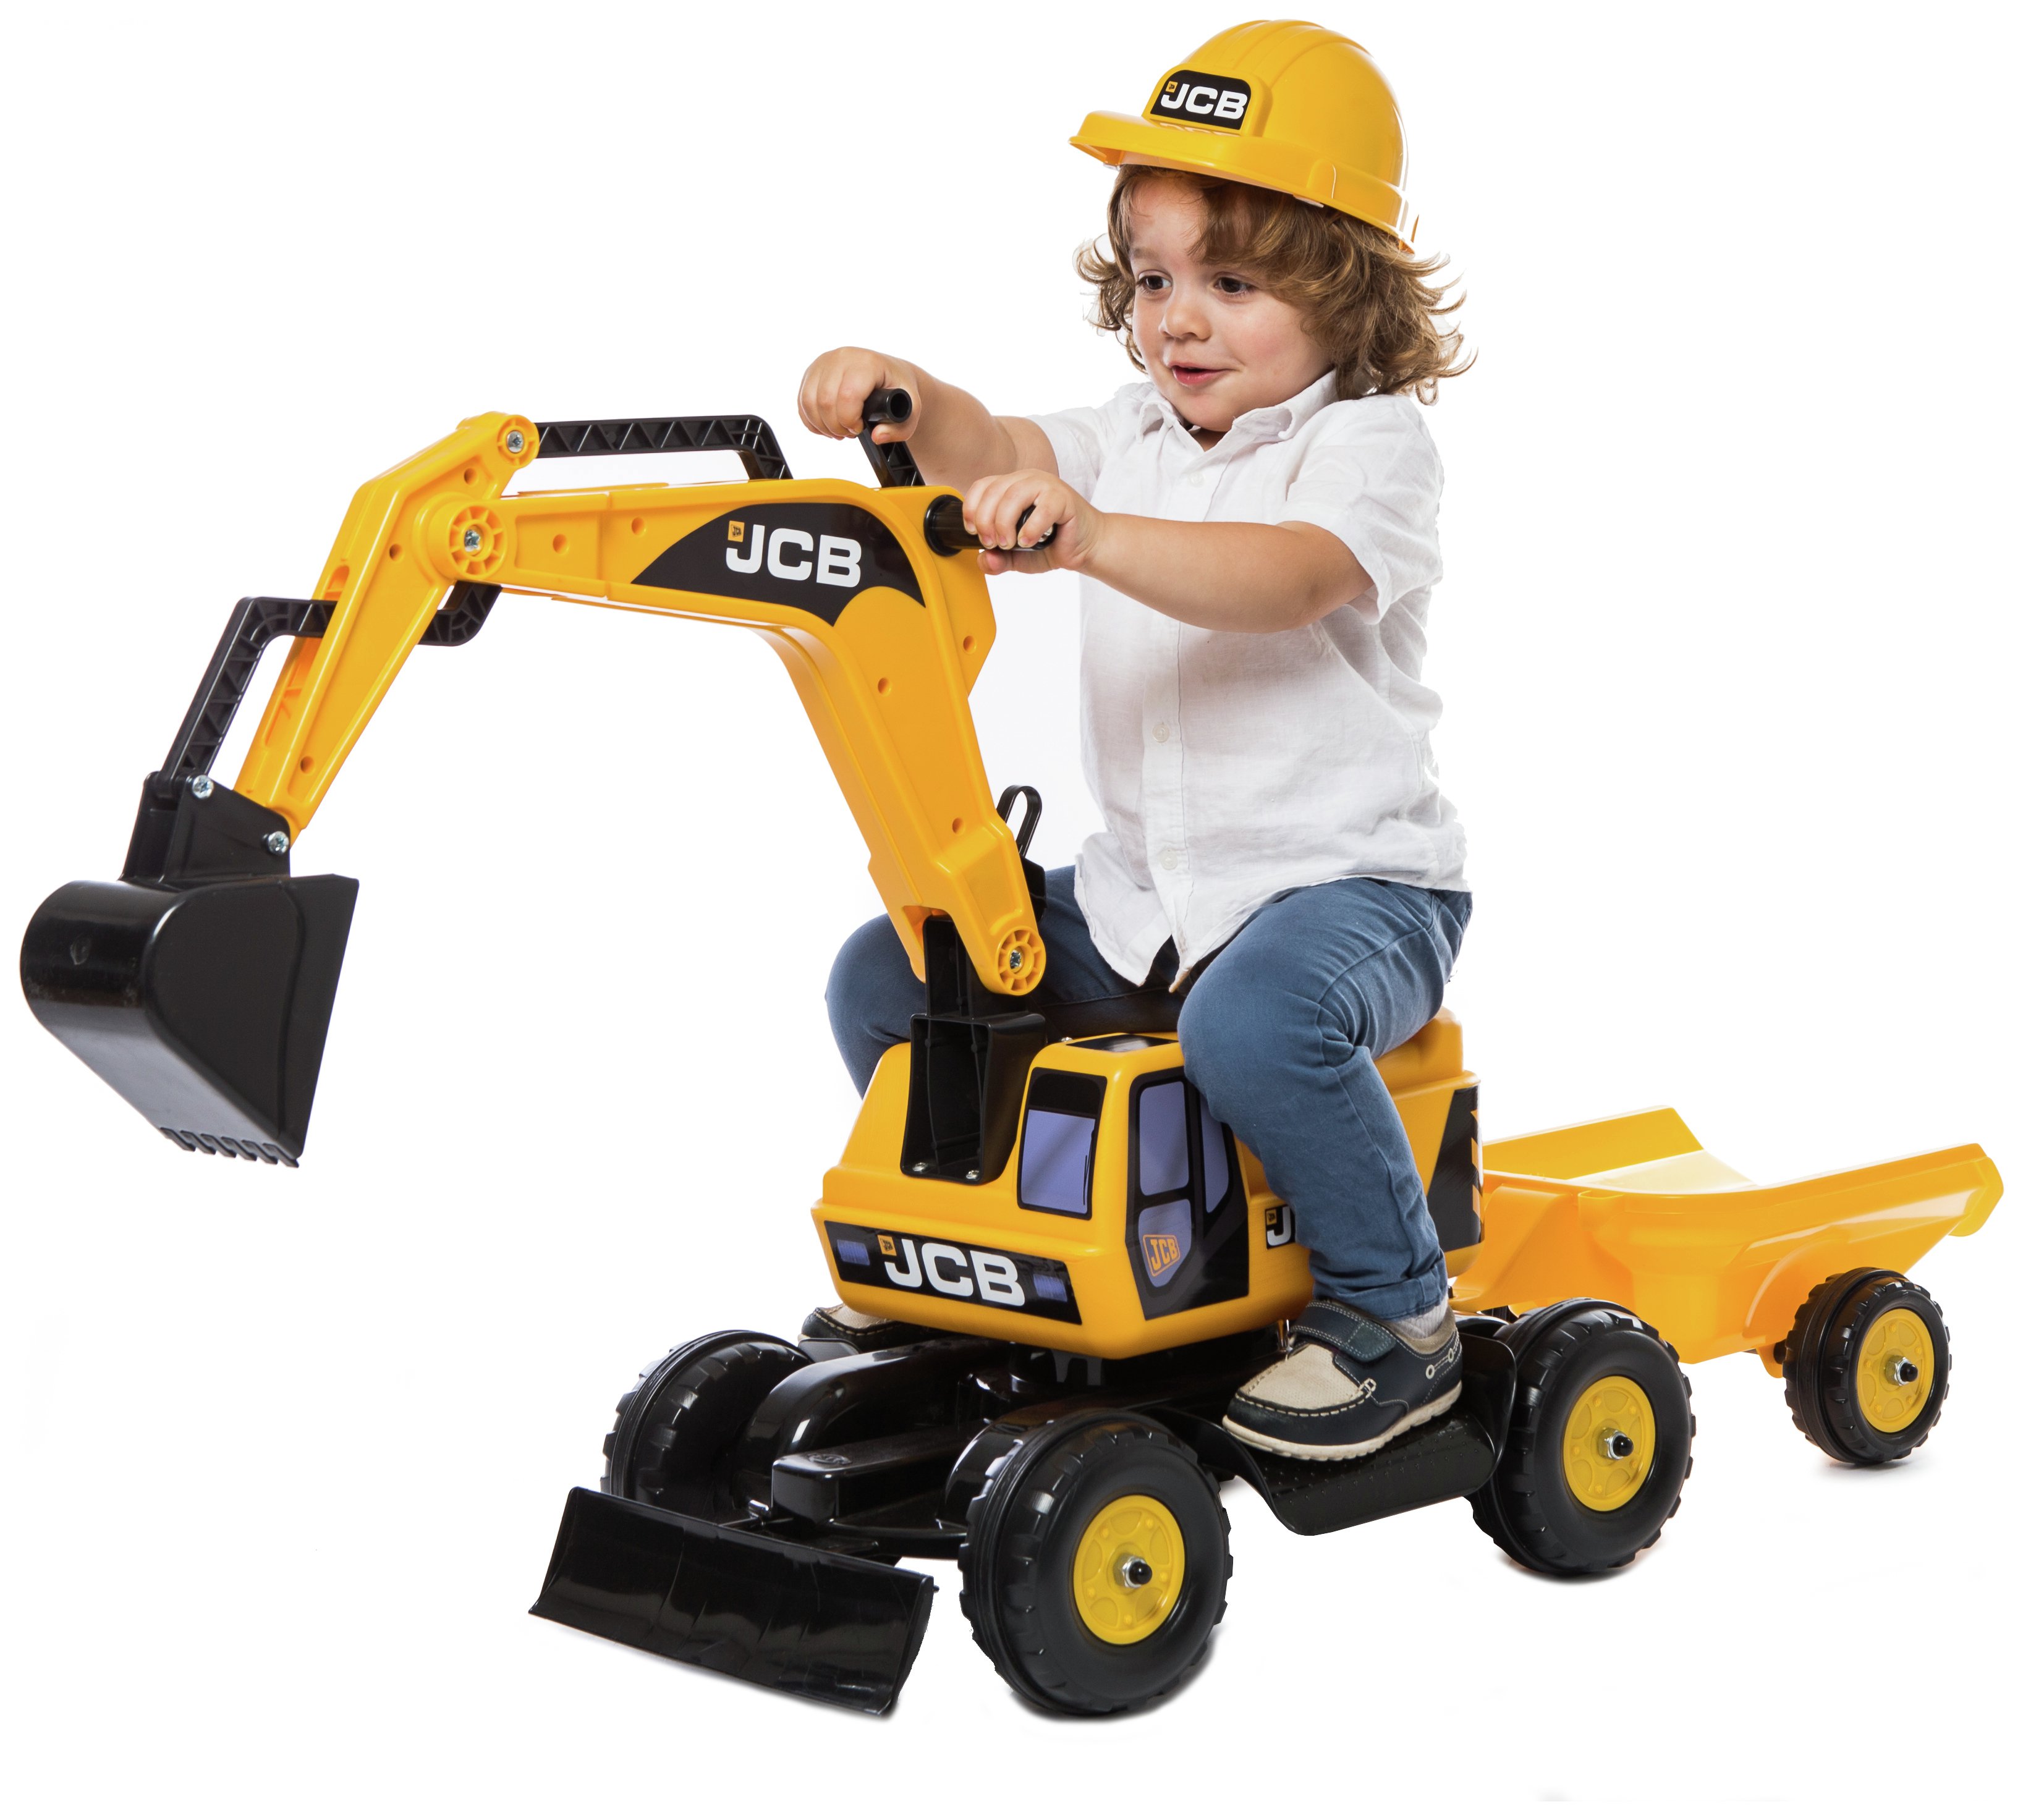 jcb digger toy ride on